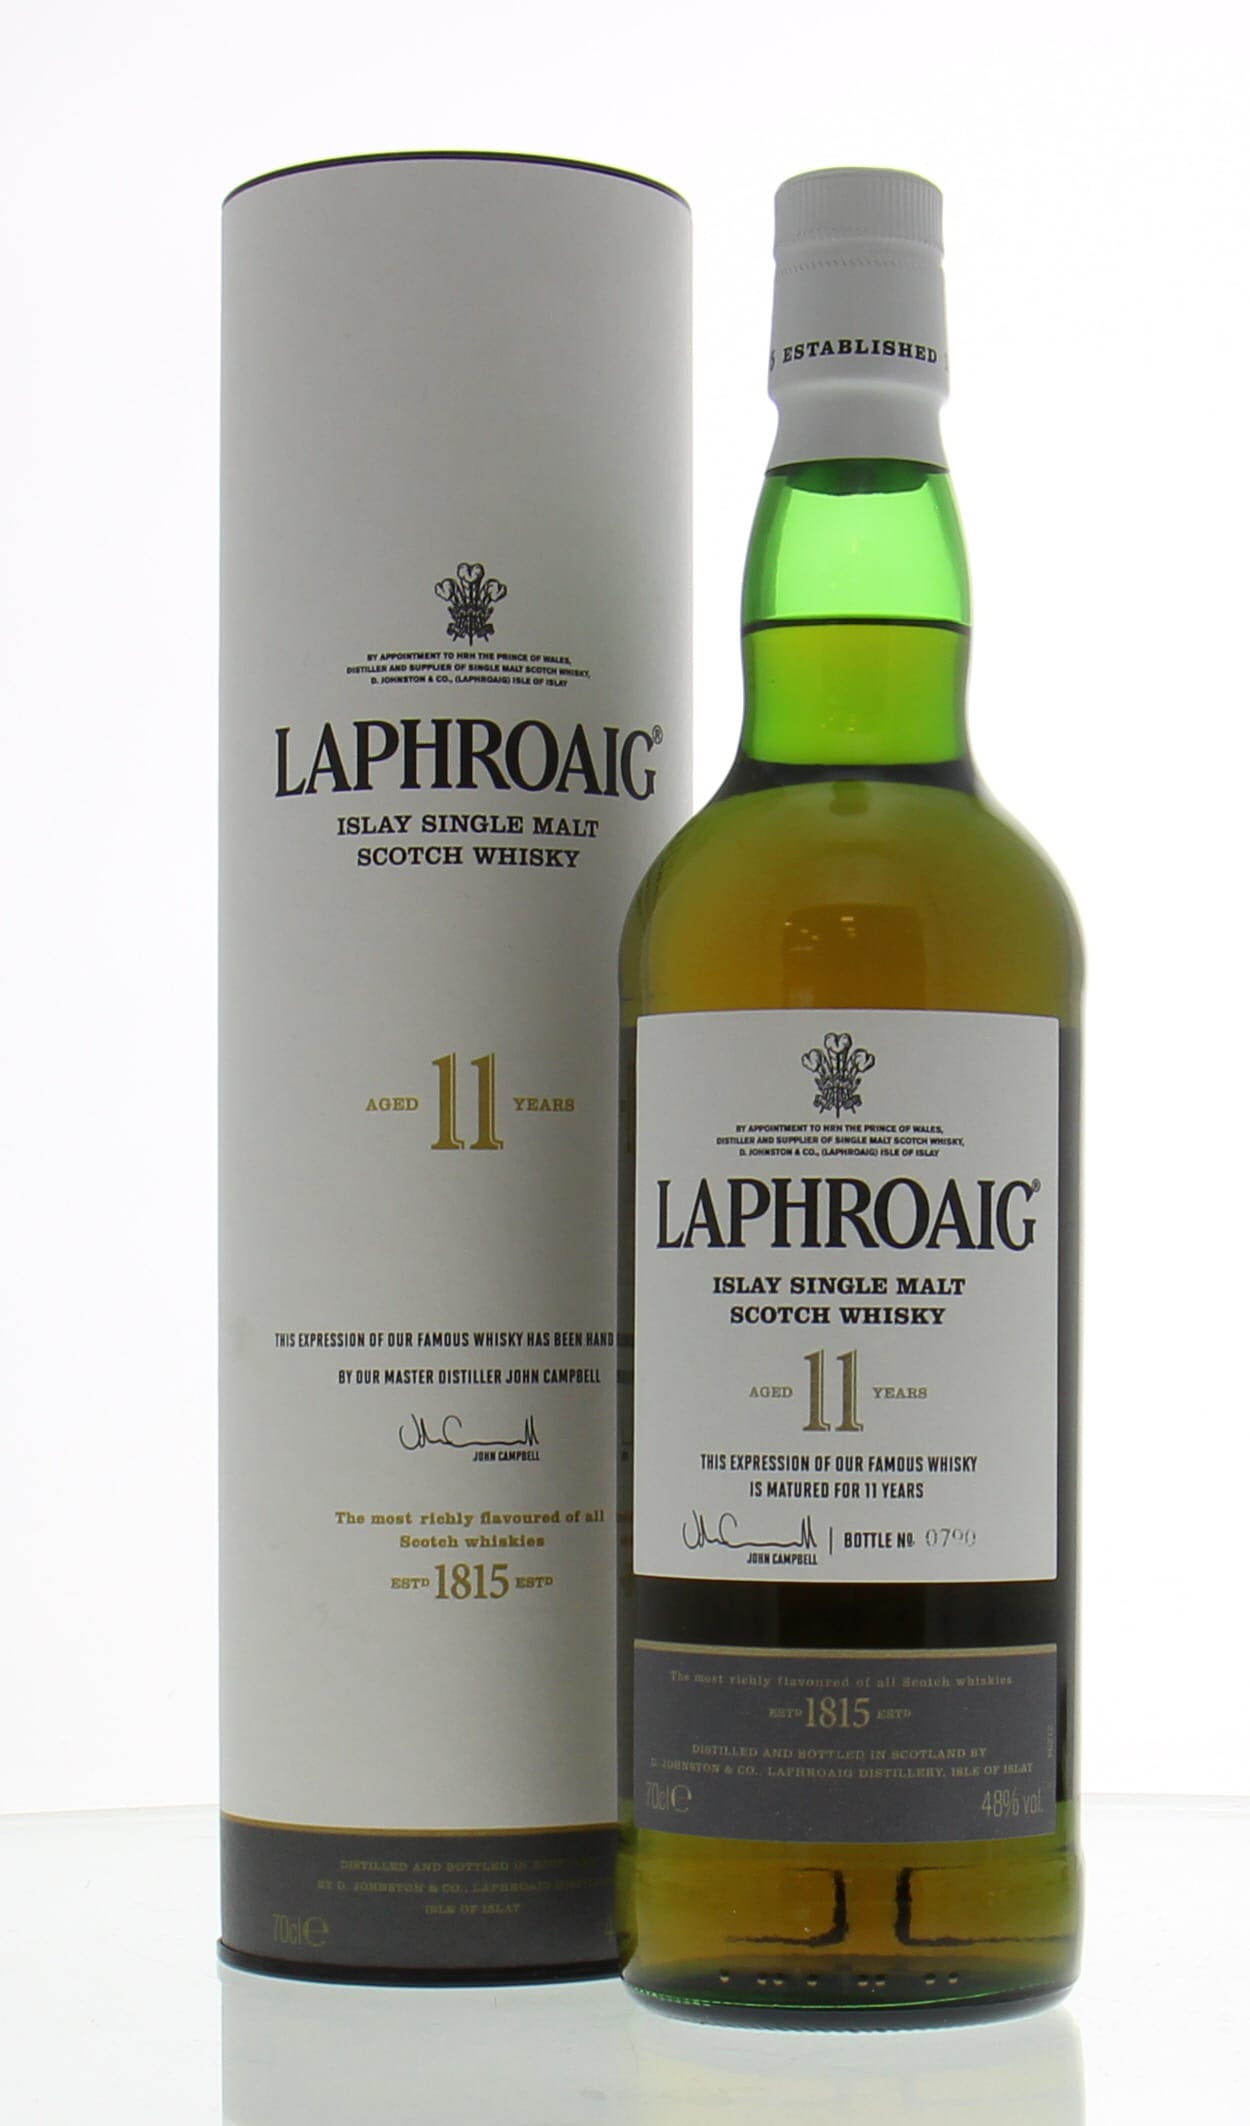 Laphroaig - 11 Years Old Bottled for Exquisite Store Amsterdam Airport Schiphol 48% NV